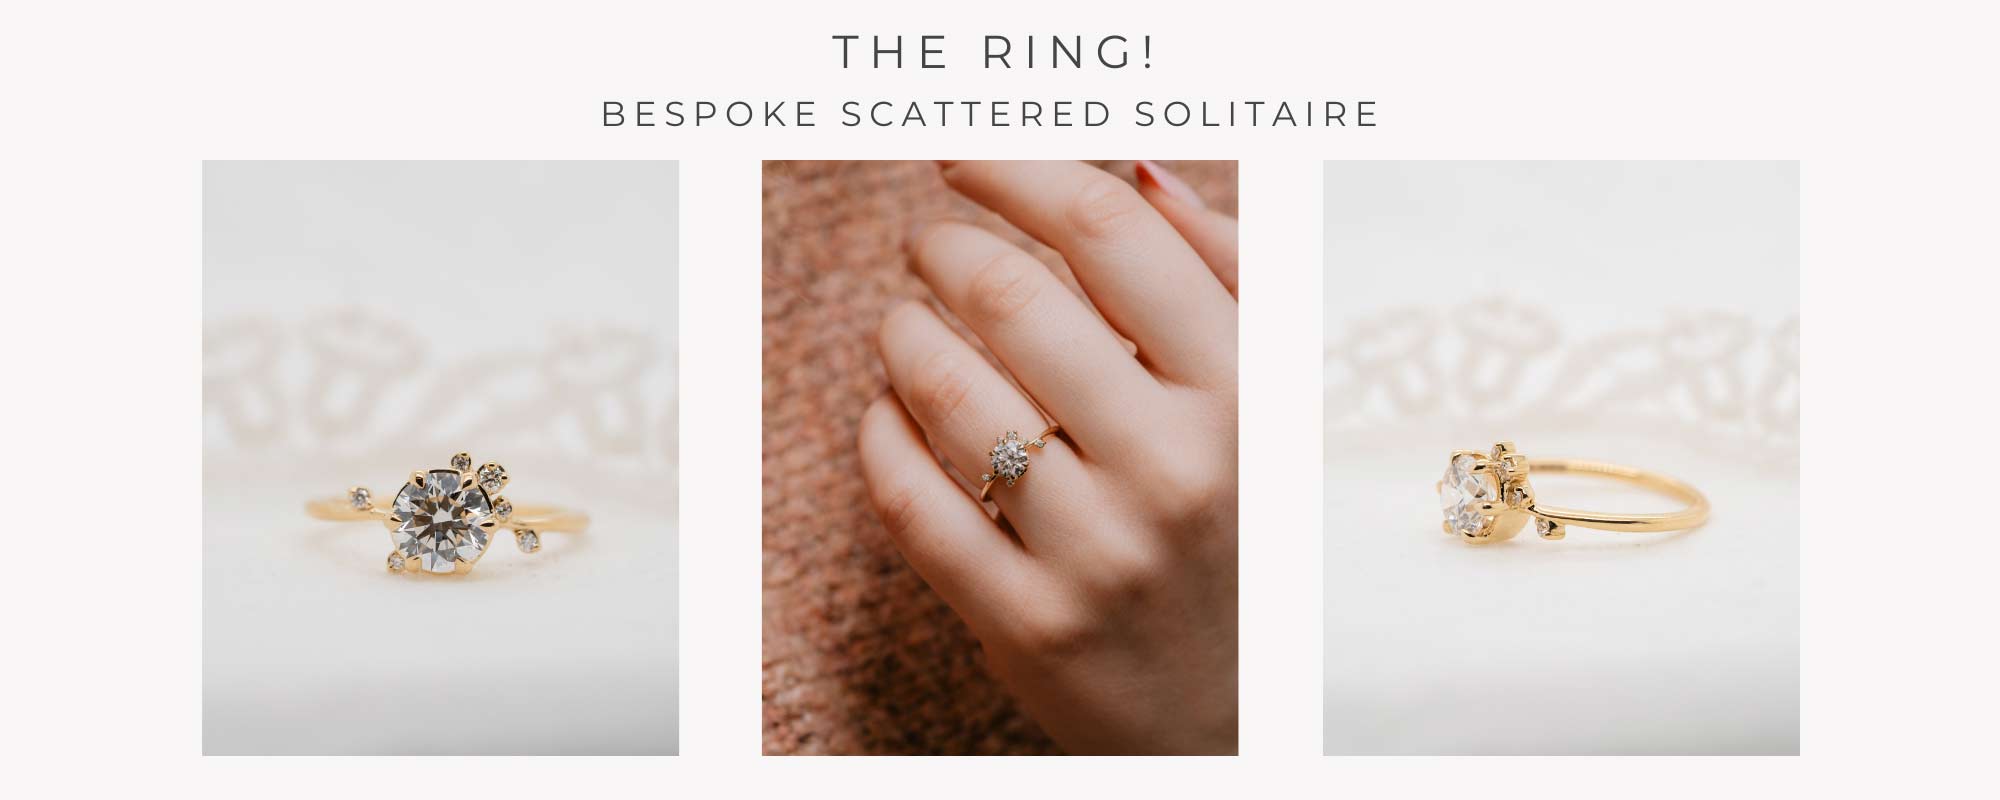 Bespoke scattered solitaire engagement ring.